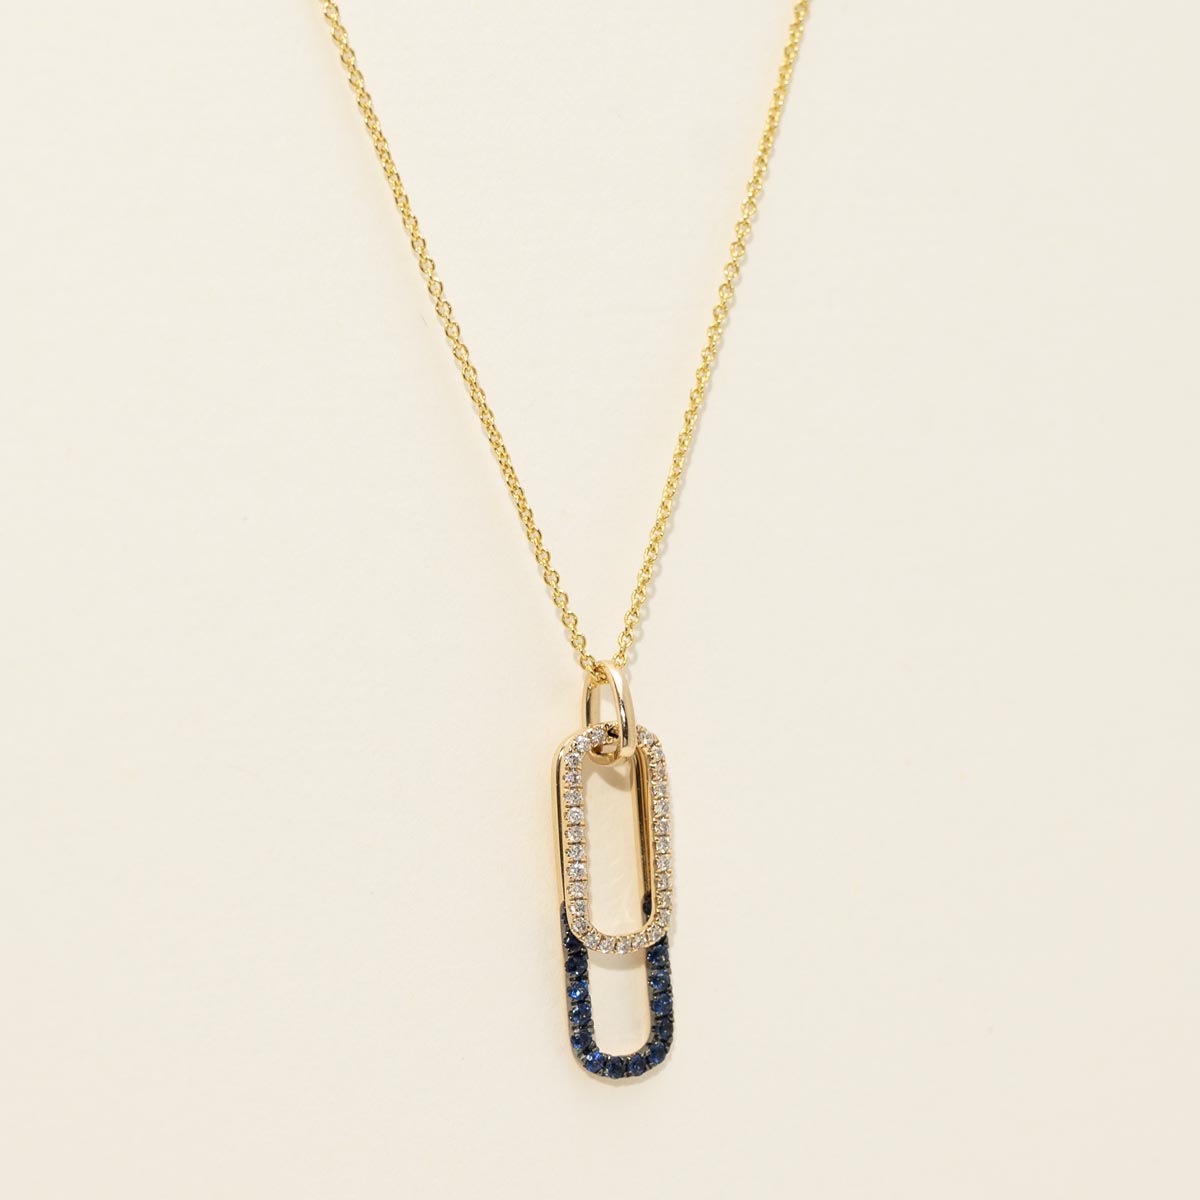 Sapphire Paperclip Necklace in 14kt Yellow Gold with Diamonds (1/10ct tw)